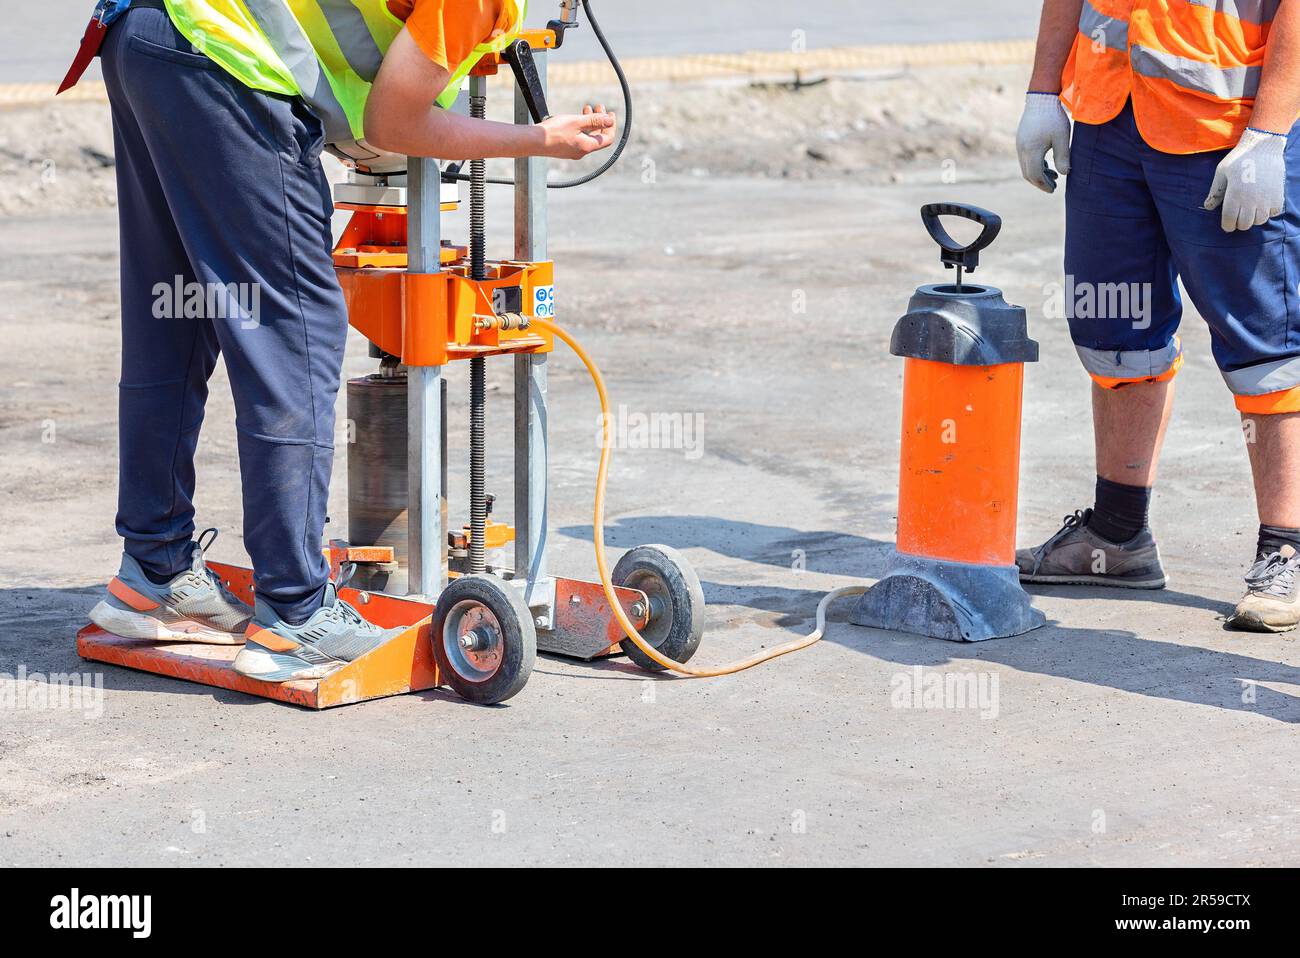 Road builders set up a gasoline drilling machine to cut asphalt concrete samples on a sunny day. Stock Photo